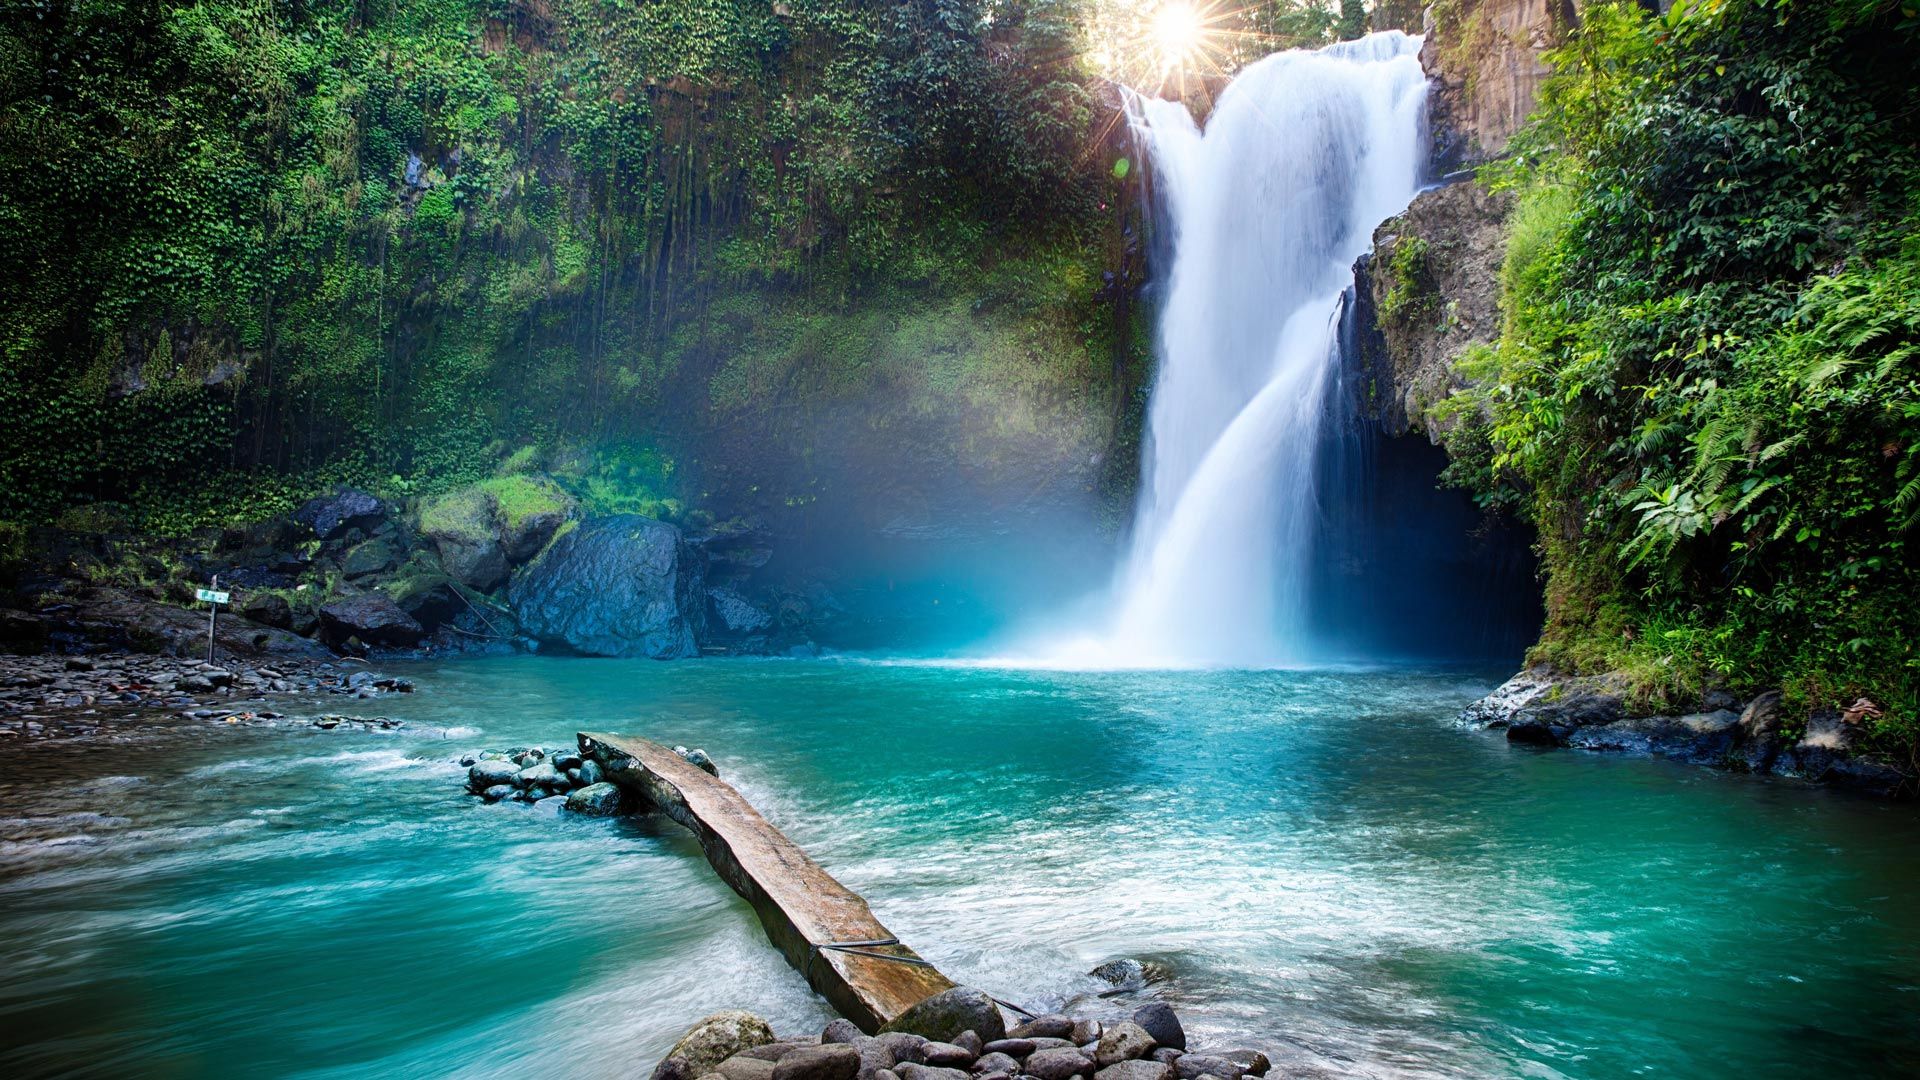 Bali's Best Hot Springs and Waterfalls